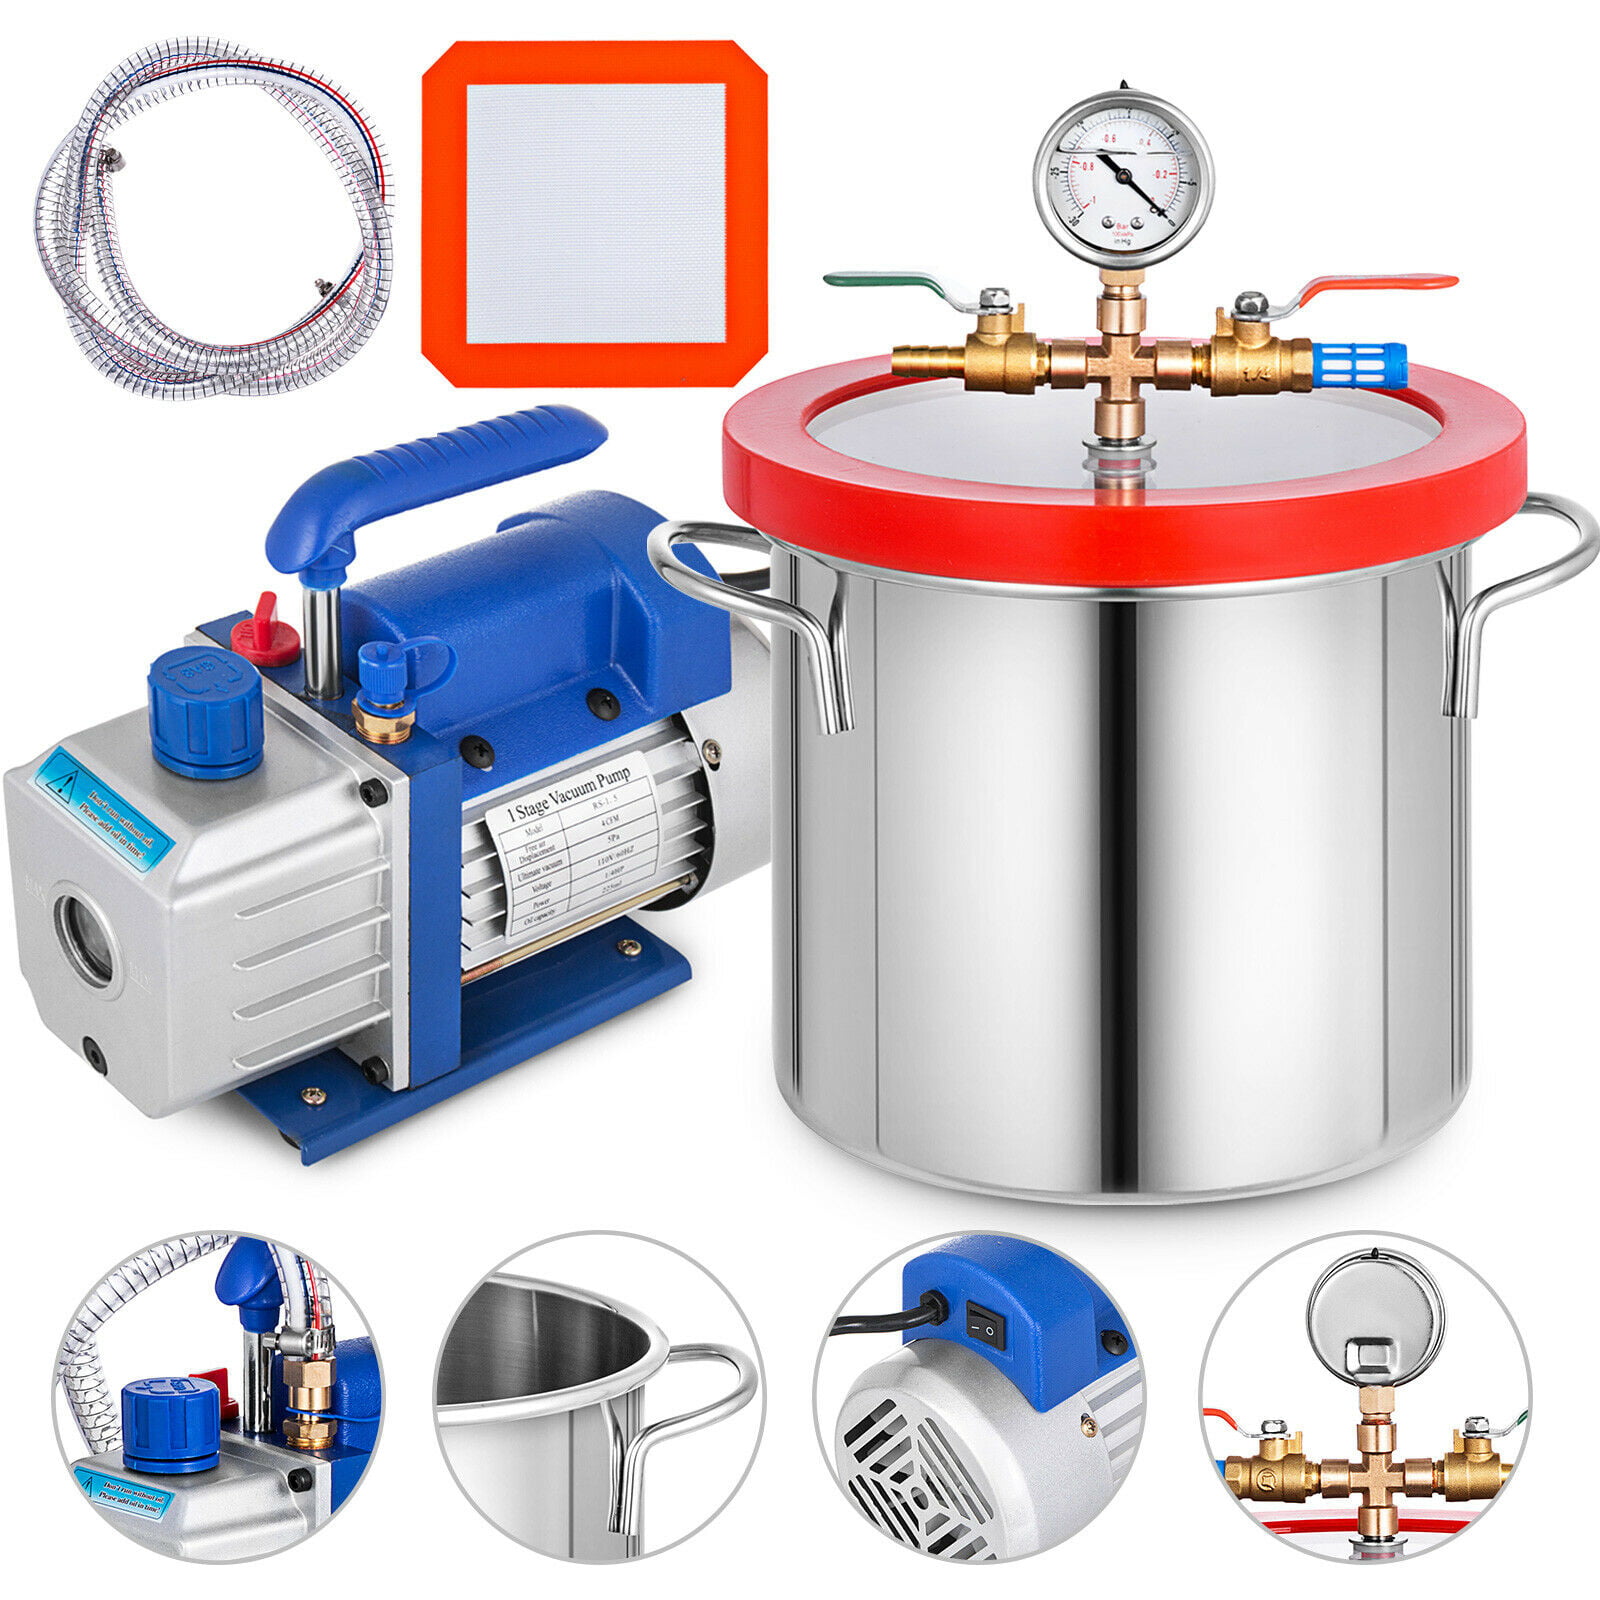 SVac 3 Gallon Wide Stainless Steel Vacuum Chamber and VE225 4CFM Two Stage Vacuum Pump Kit